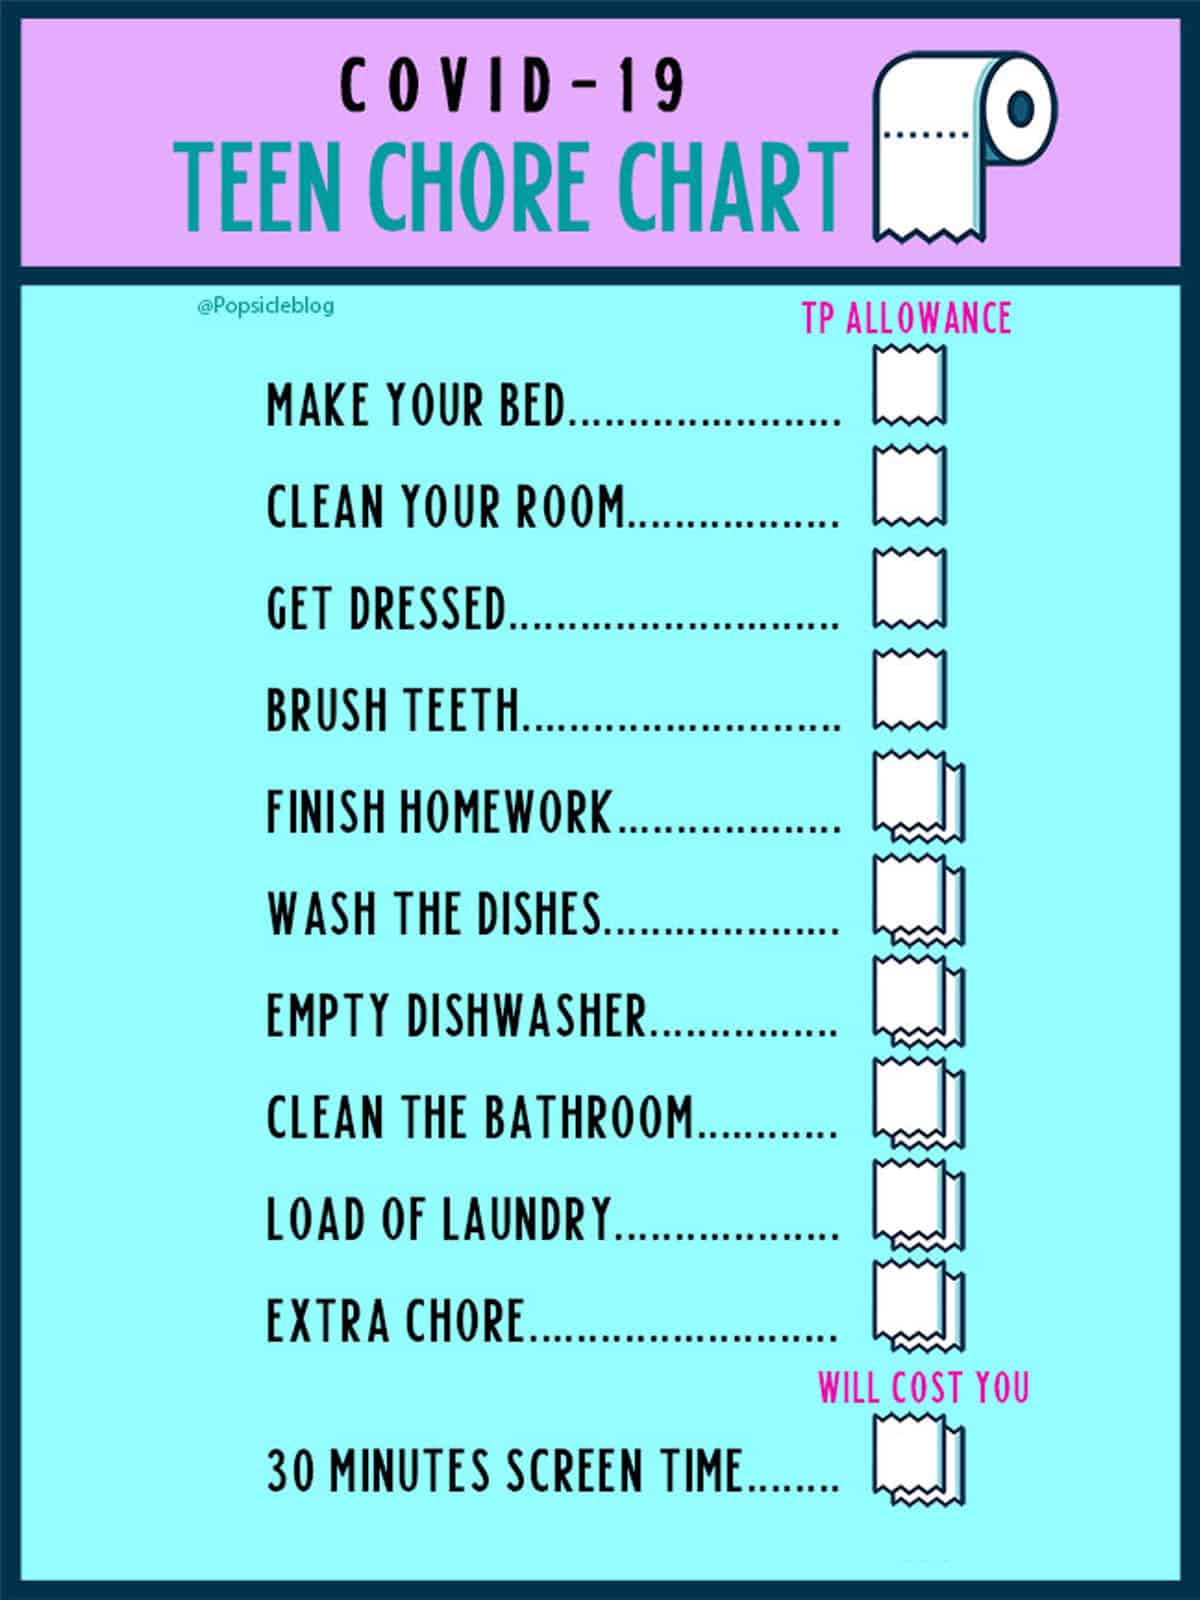 Motivate Teens to Do Their Chores During the Covid-19 Outbreak